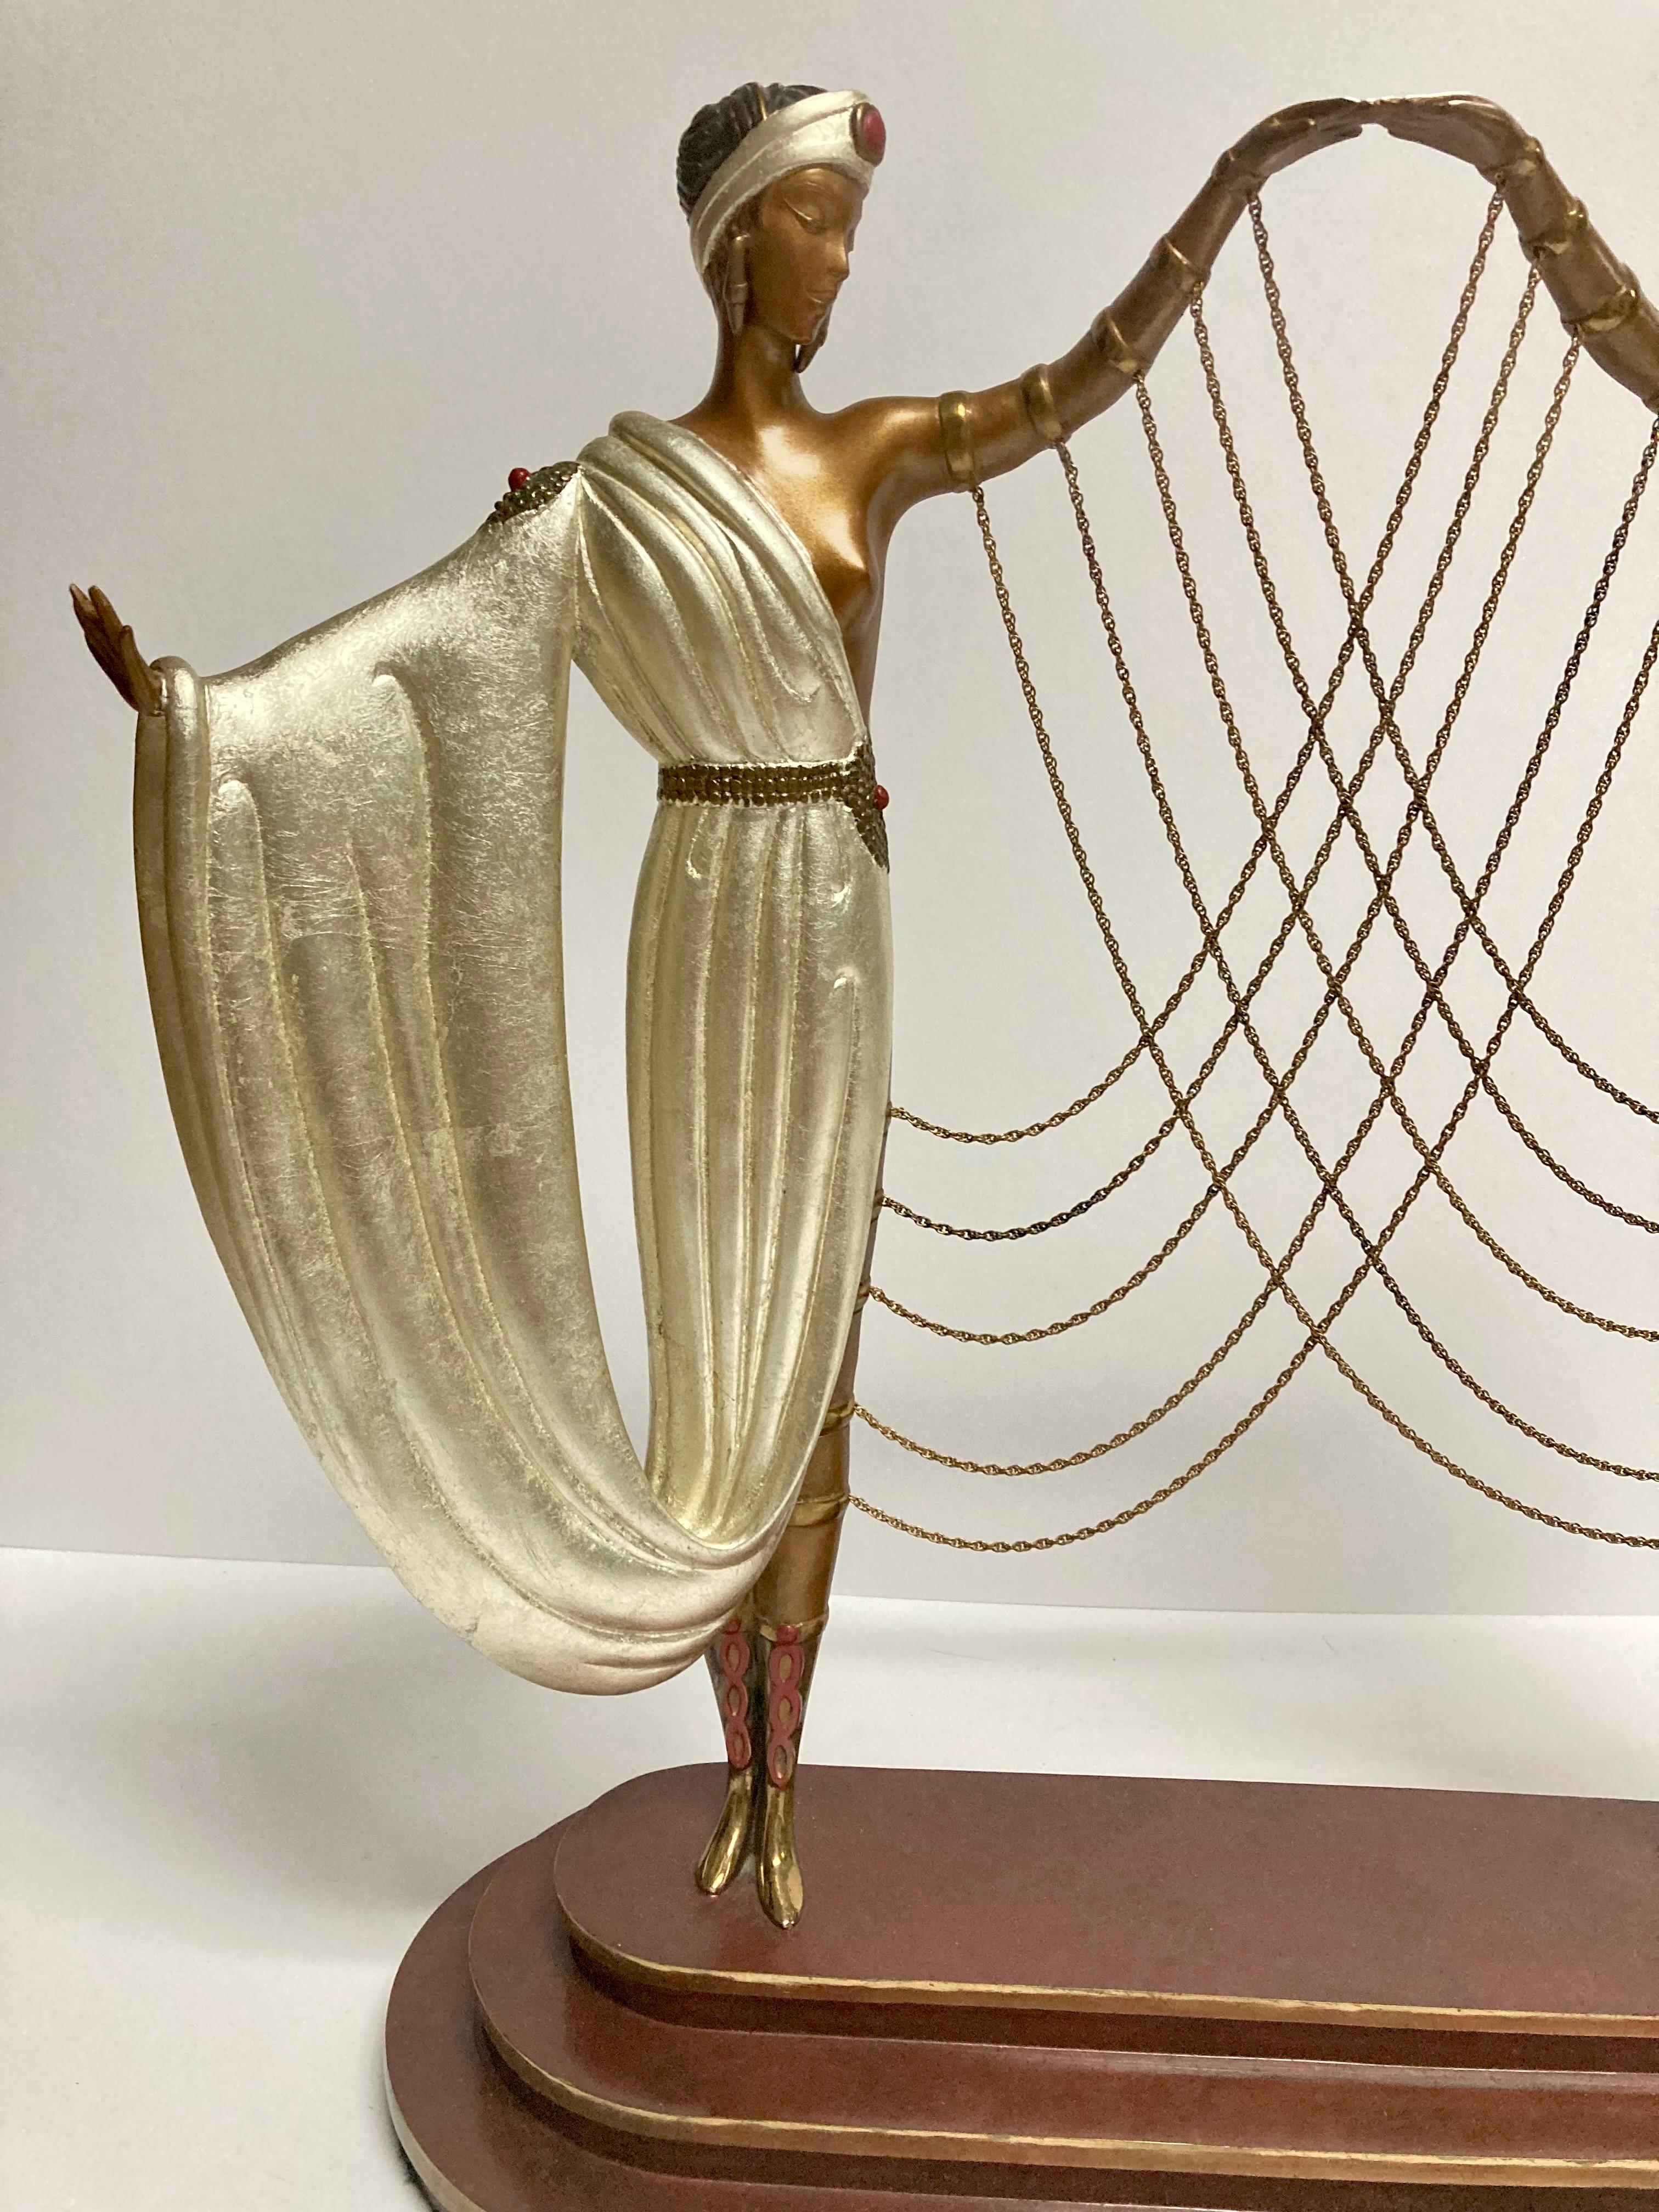 This is an Erte 1986 original bronze “wedding” signed and numbered . In good condition measures 15x18x5